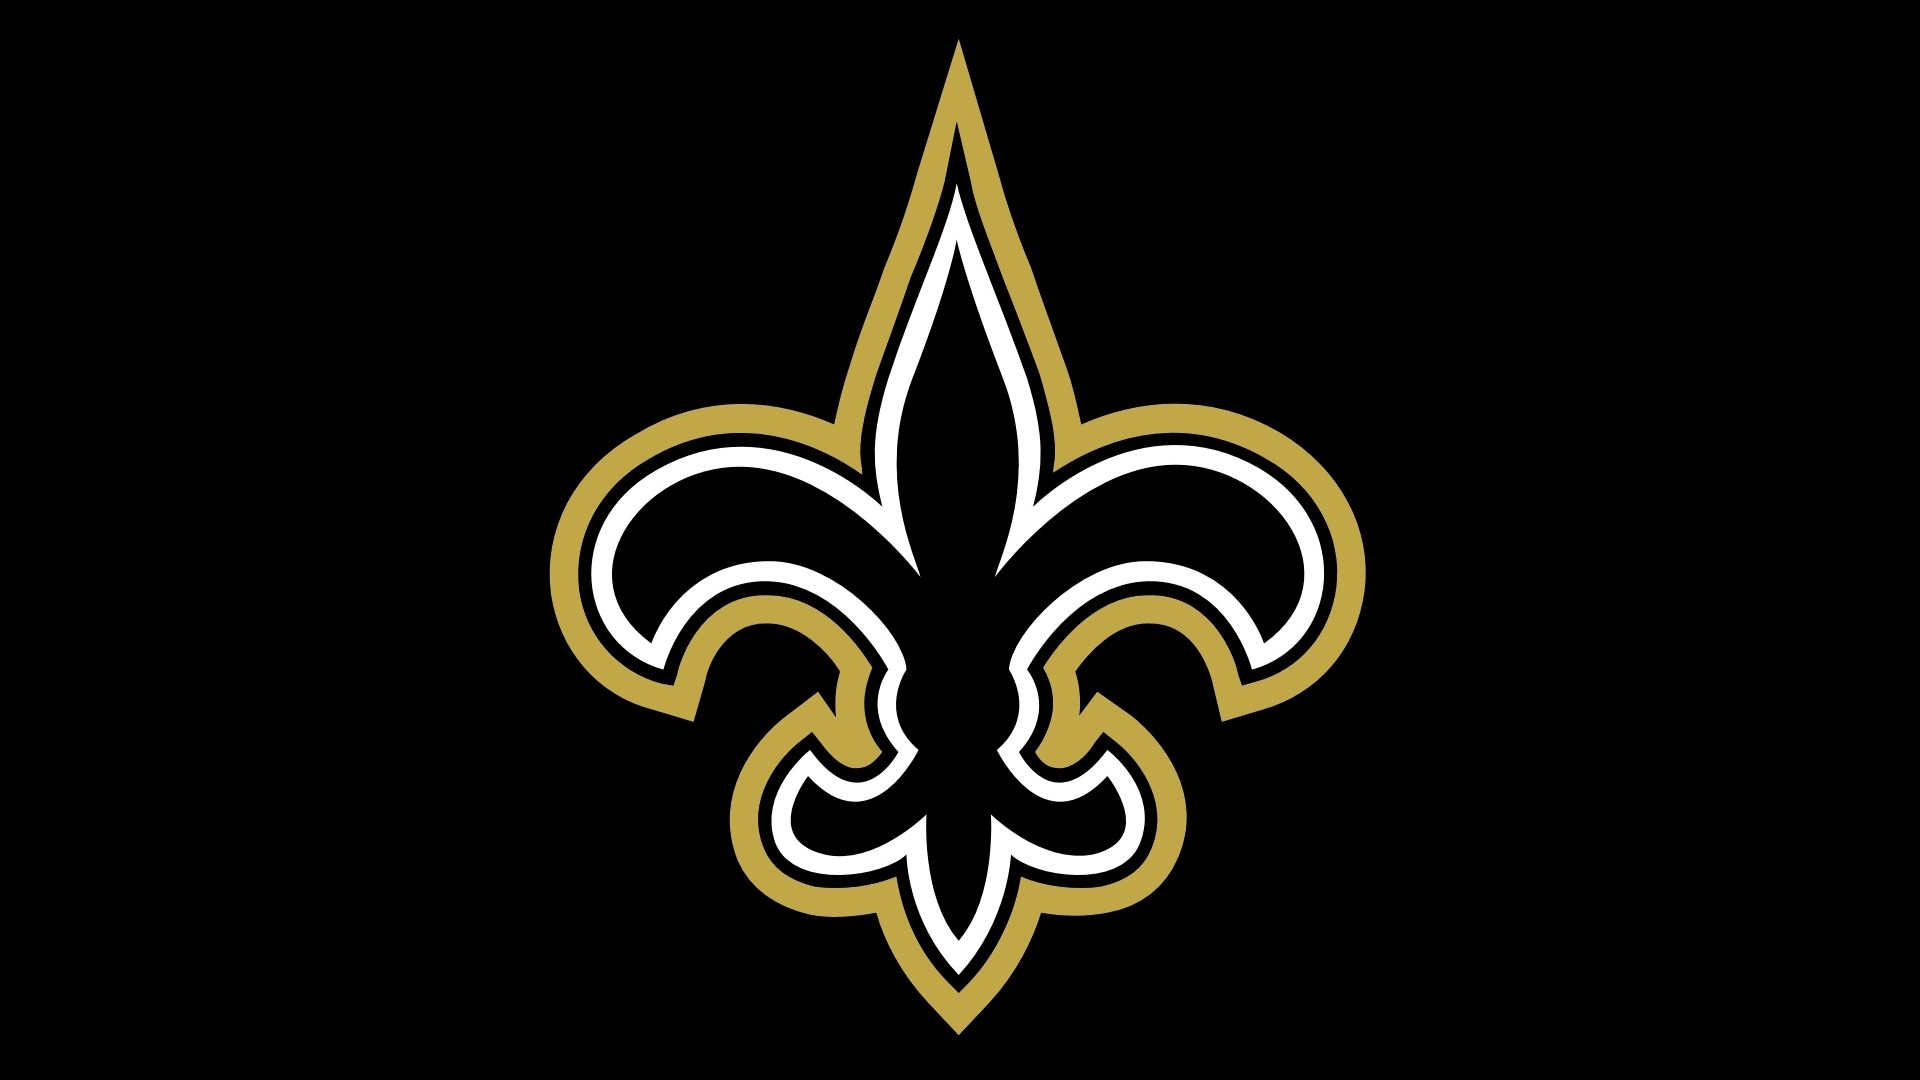 HD Backgrounds New Orleans Saints with resolution 1920x1080 pixel. You can make this wallpaper for your Mac or Windows Desktop Background, iPhone, Android or Tablet and another Smartphone device